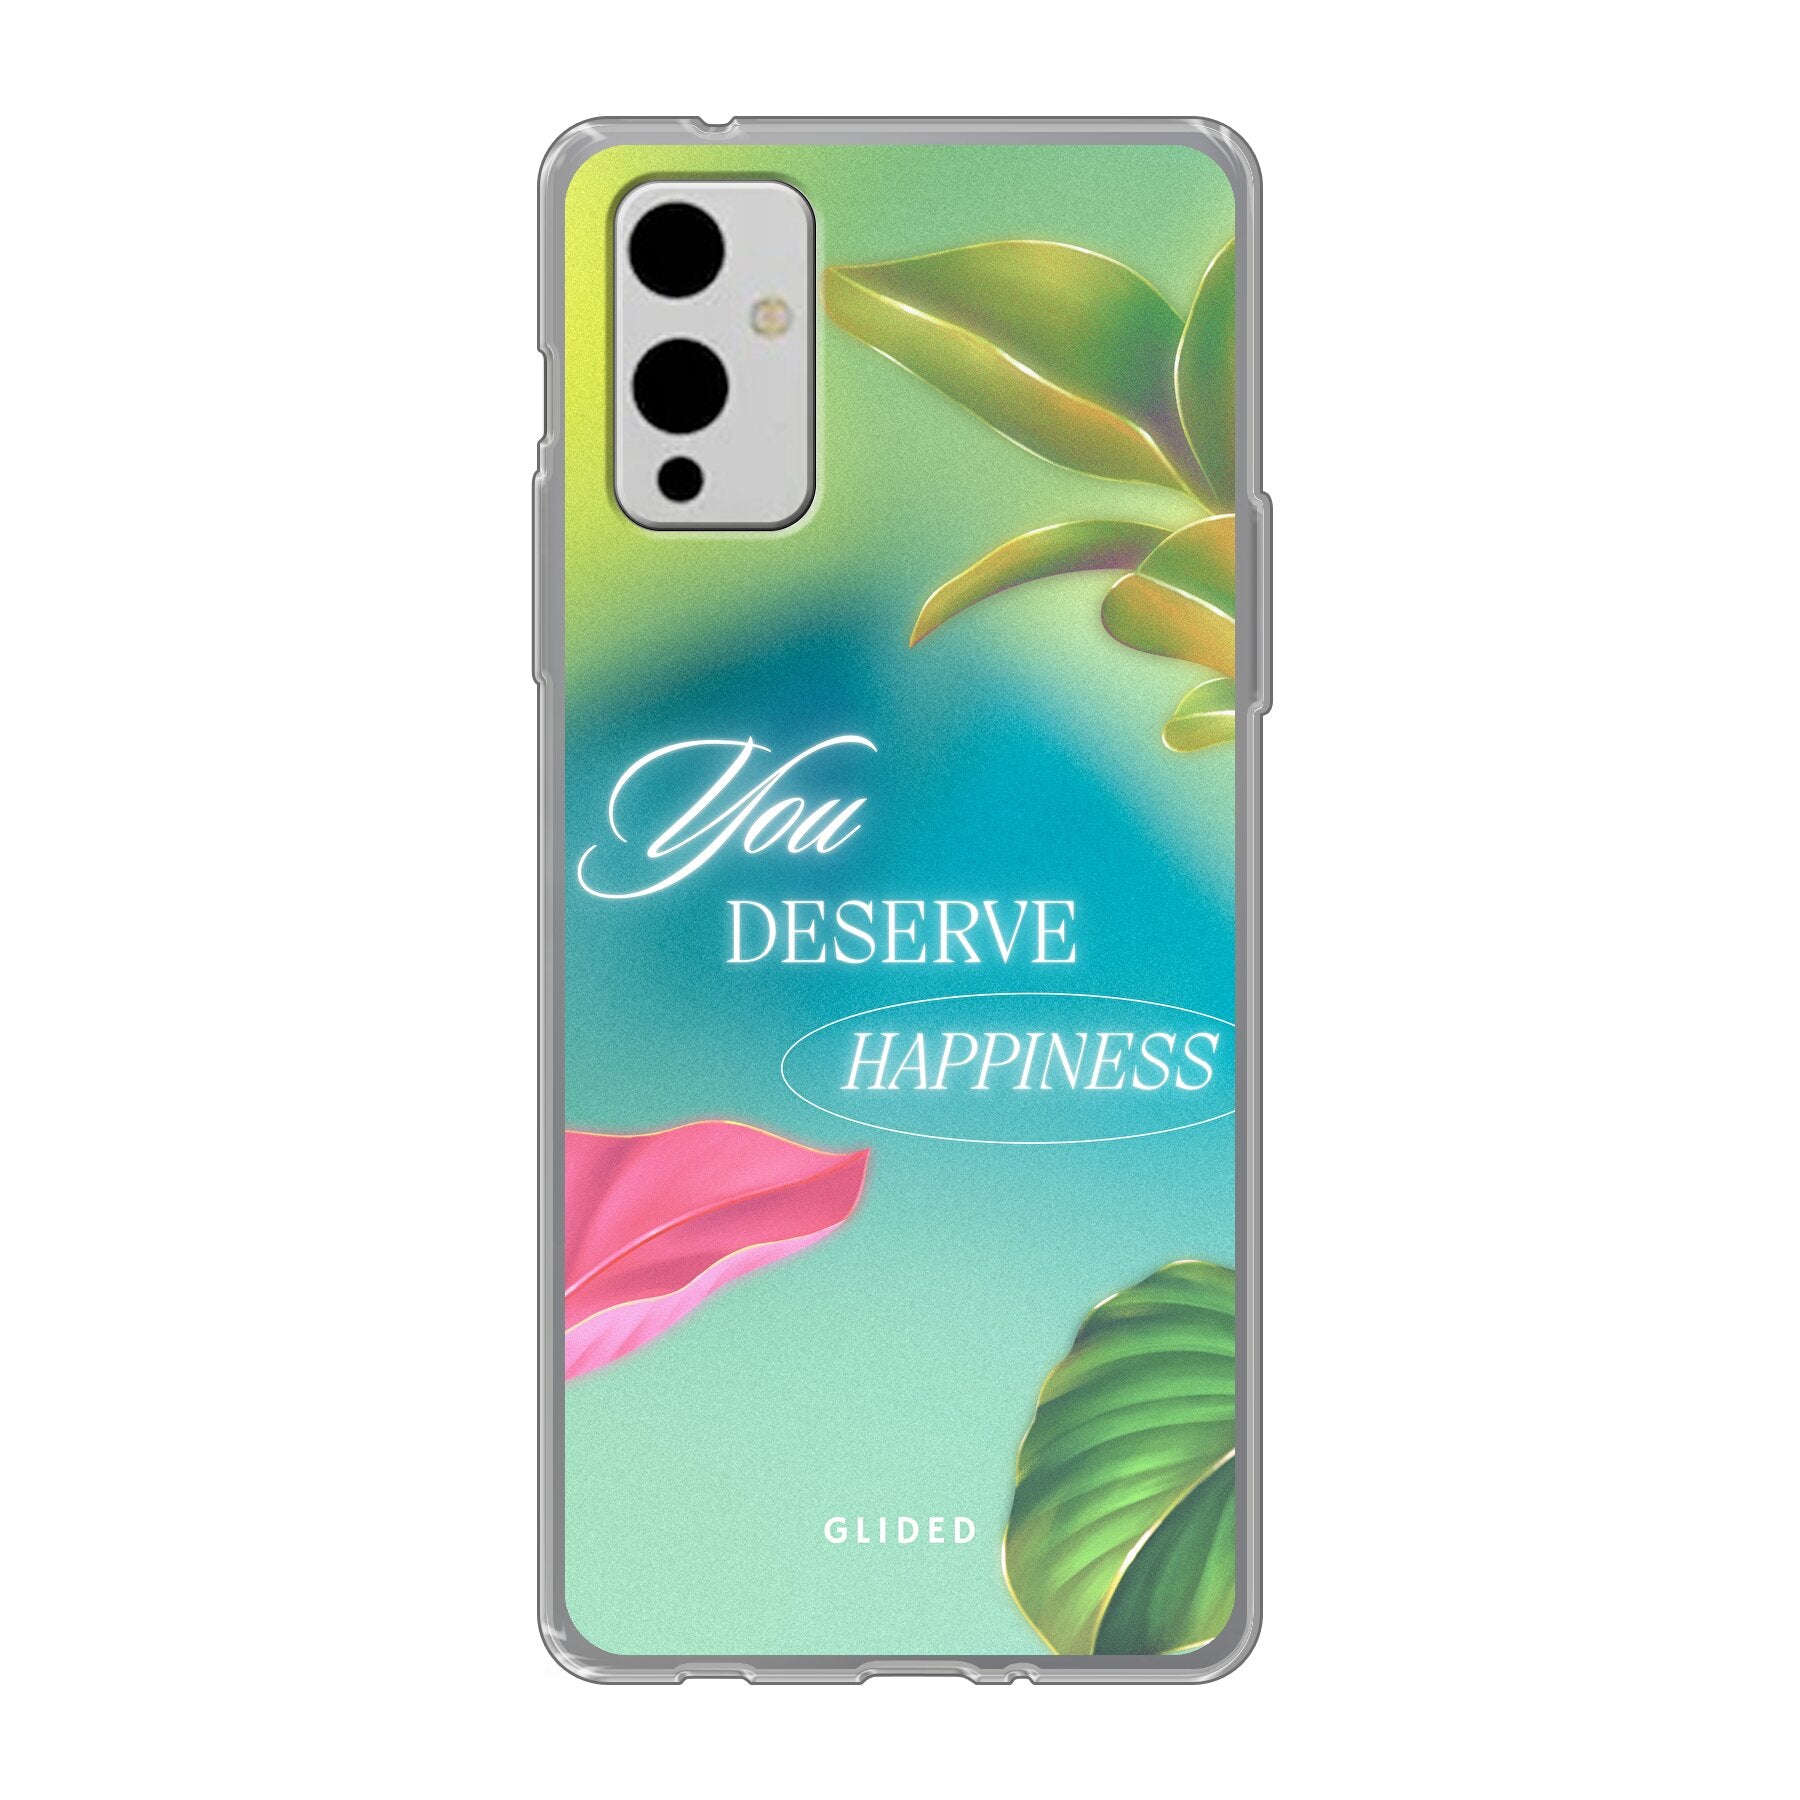 Happiness - OnePlus 9 - Soft case